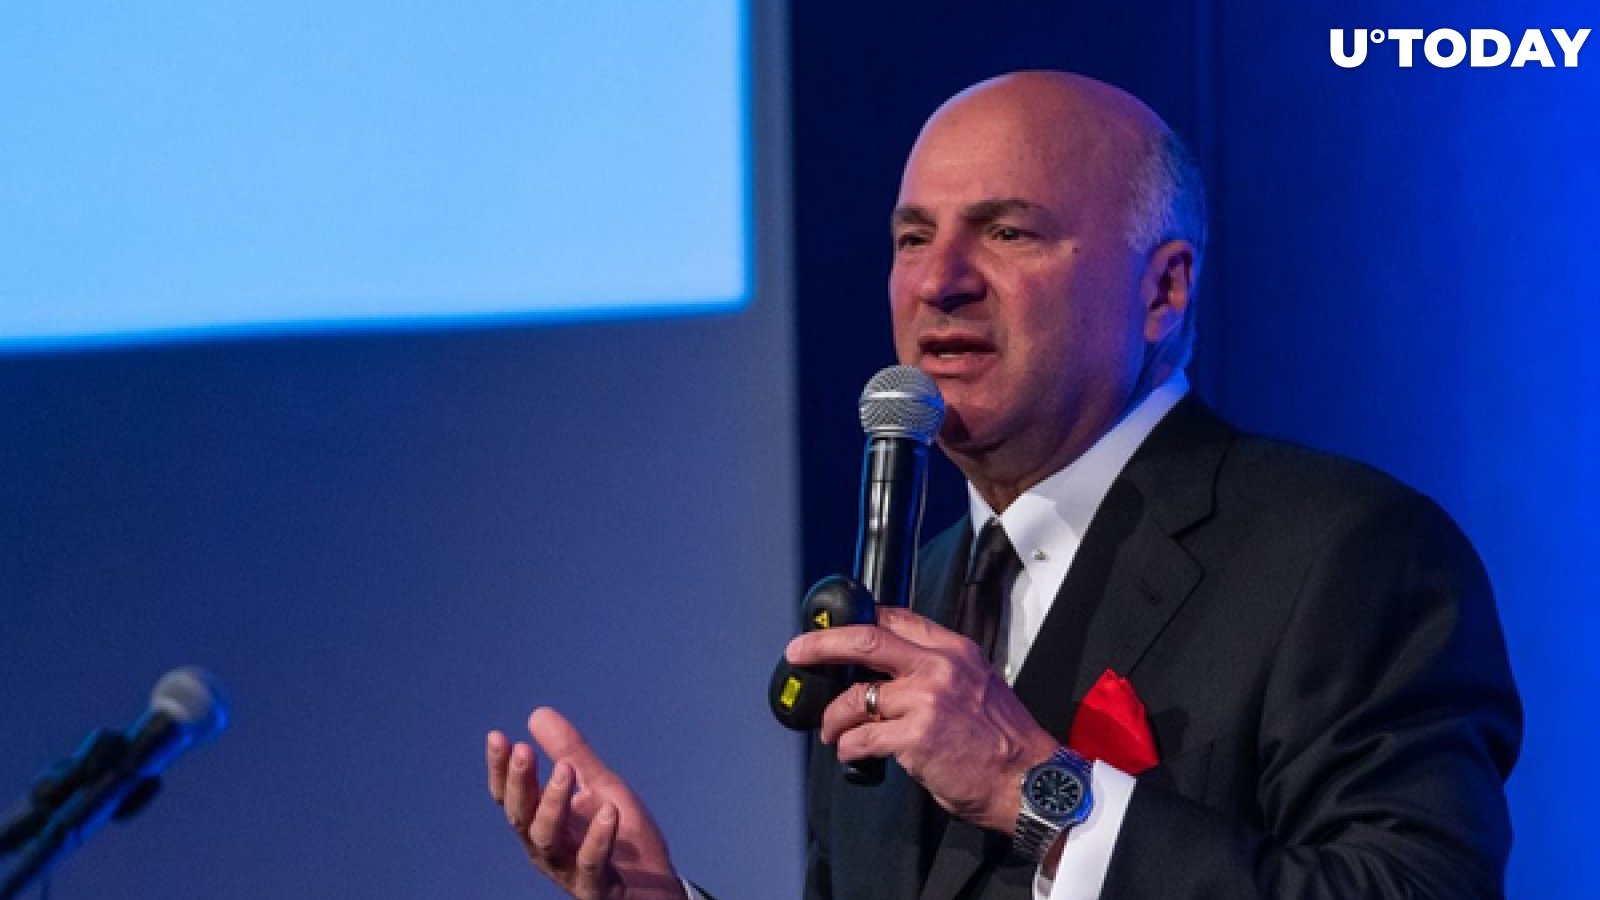 Shark Tank’s Kevin O’Leary to Put 3% of His Portfolio into Bitcoin Mining